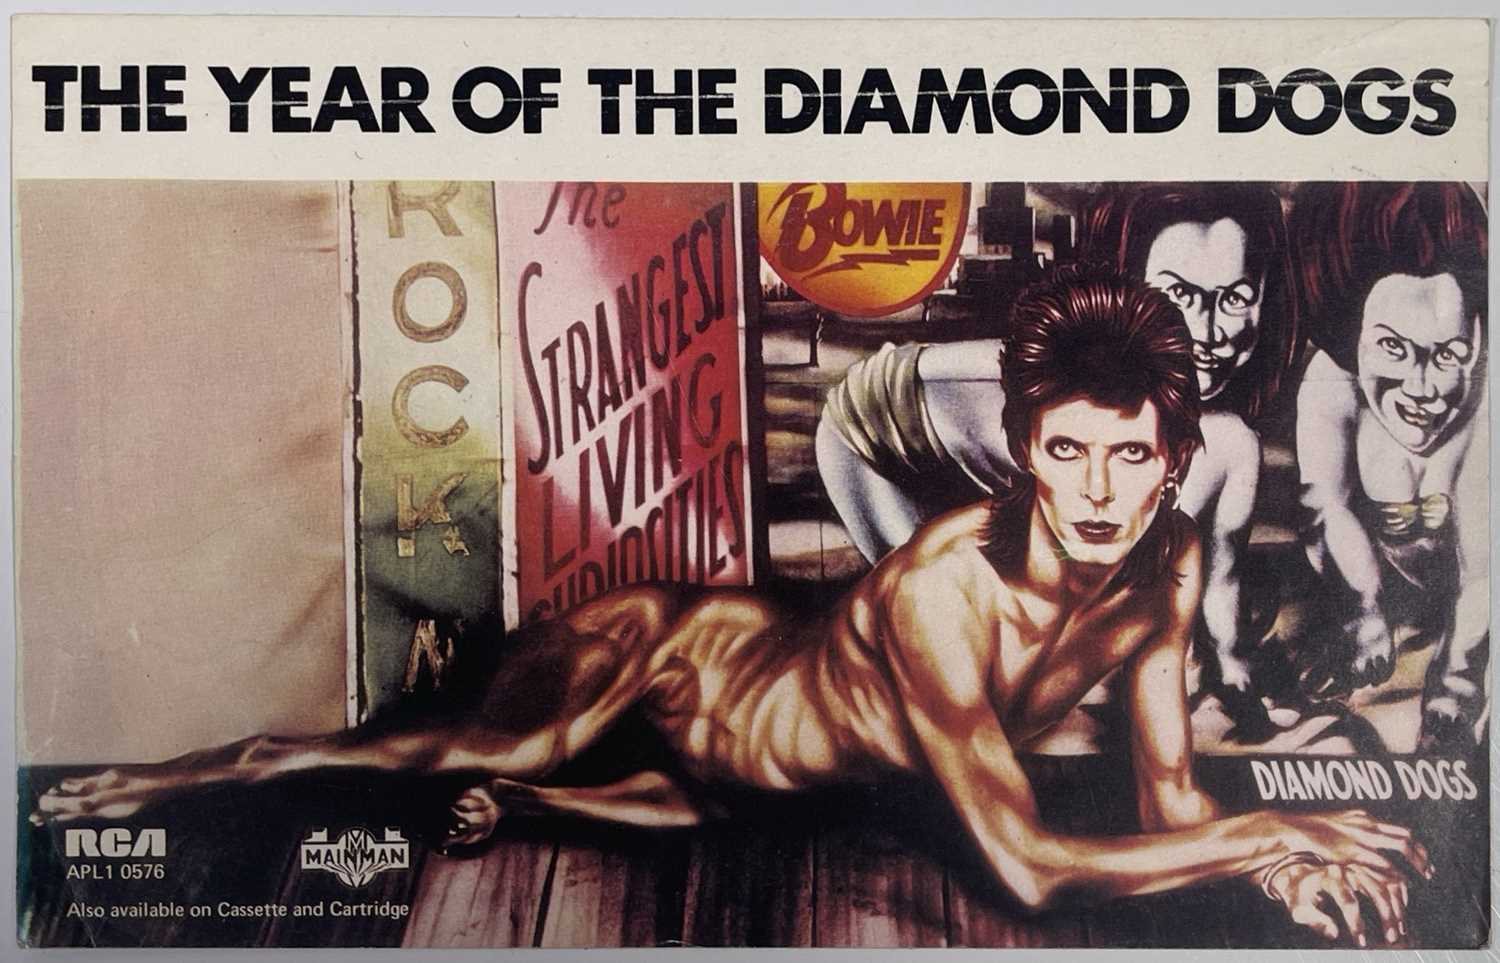 DAVID BOWIE - DIAMOND DOGS US PROGRAMME AND STICKER. - Image 8 of 9